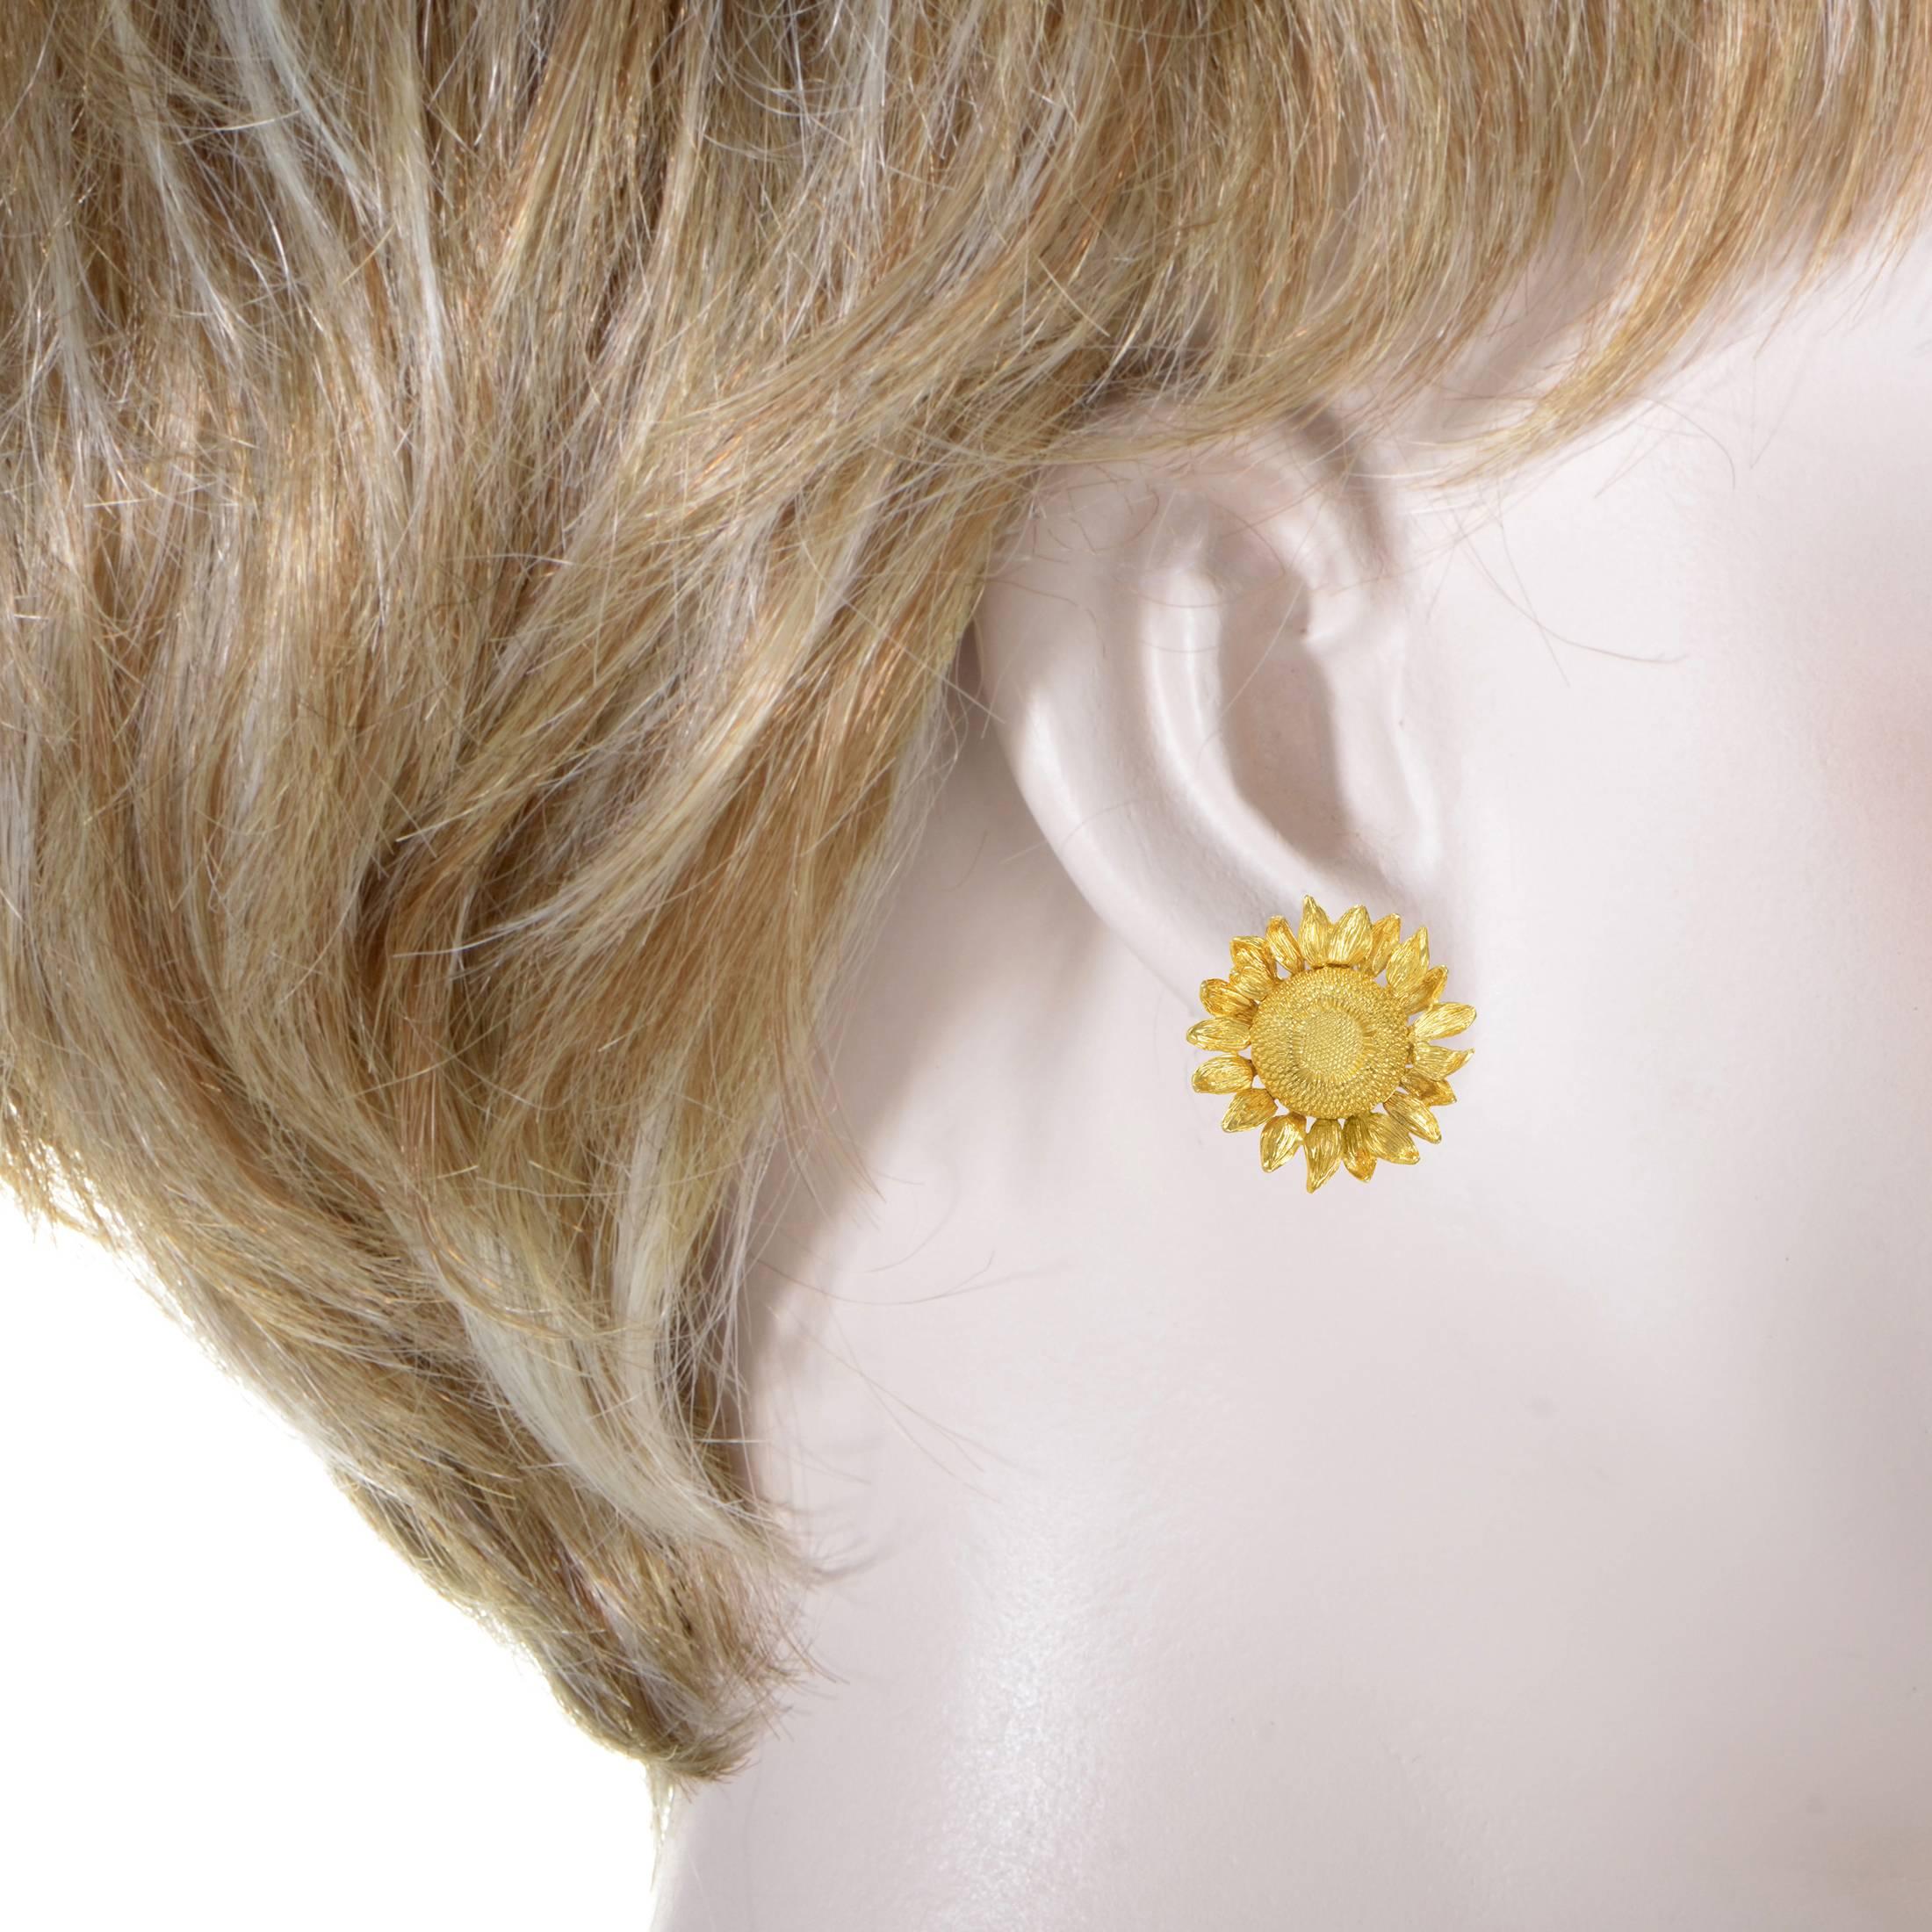 Evoking the exuberant radiance of the sun in a gorgeous sunflower motif, these fascinating earrings from Asprey are made of precious 18K yellow gold molded into an astonishing form and intricately ornamented to produce an irresistible